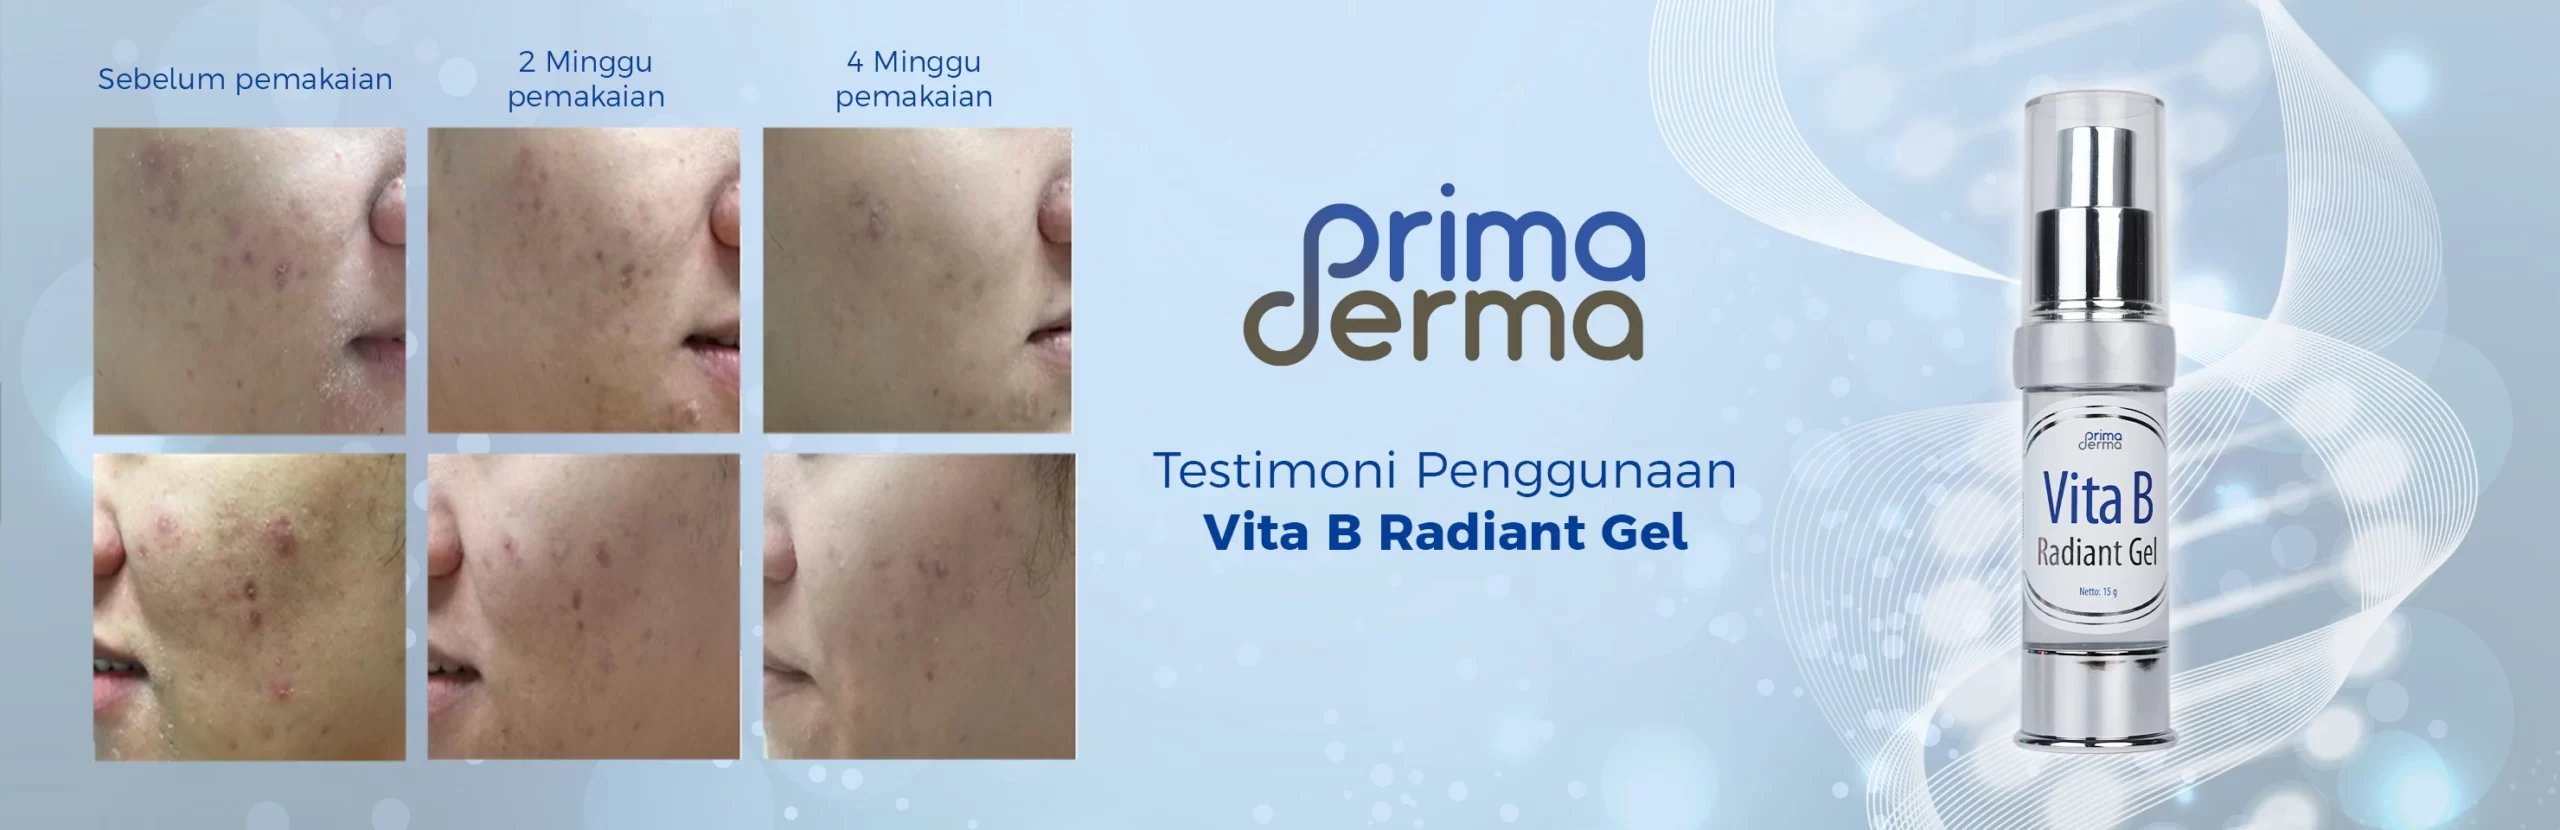 review primaderma acne